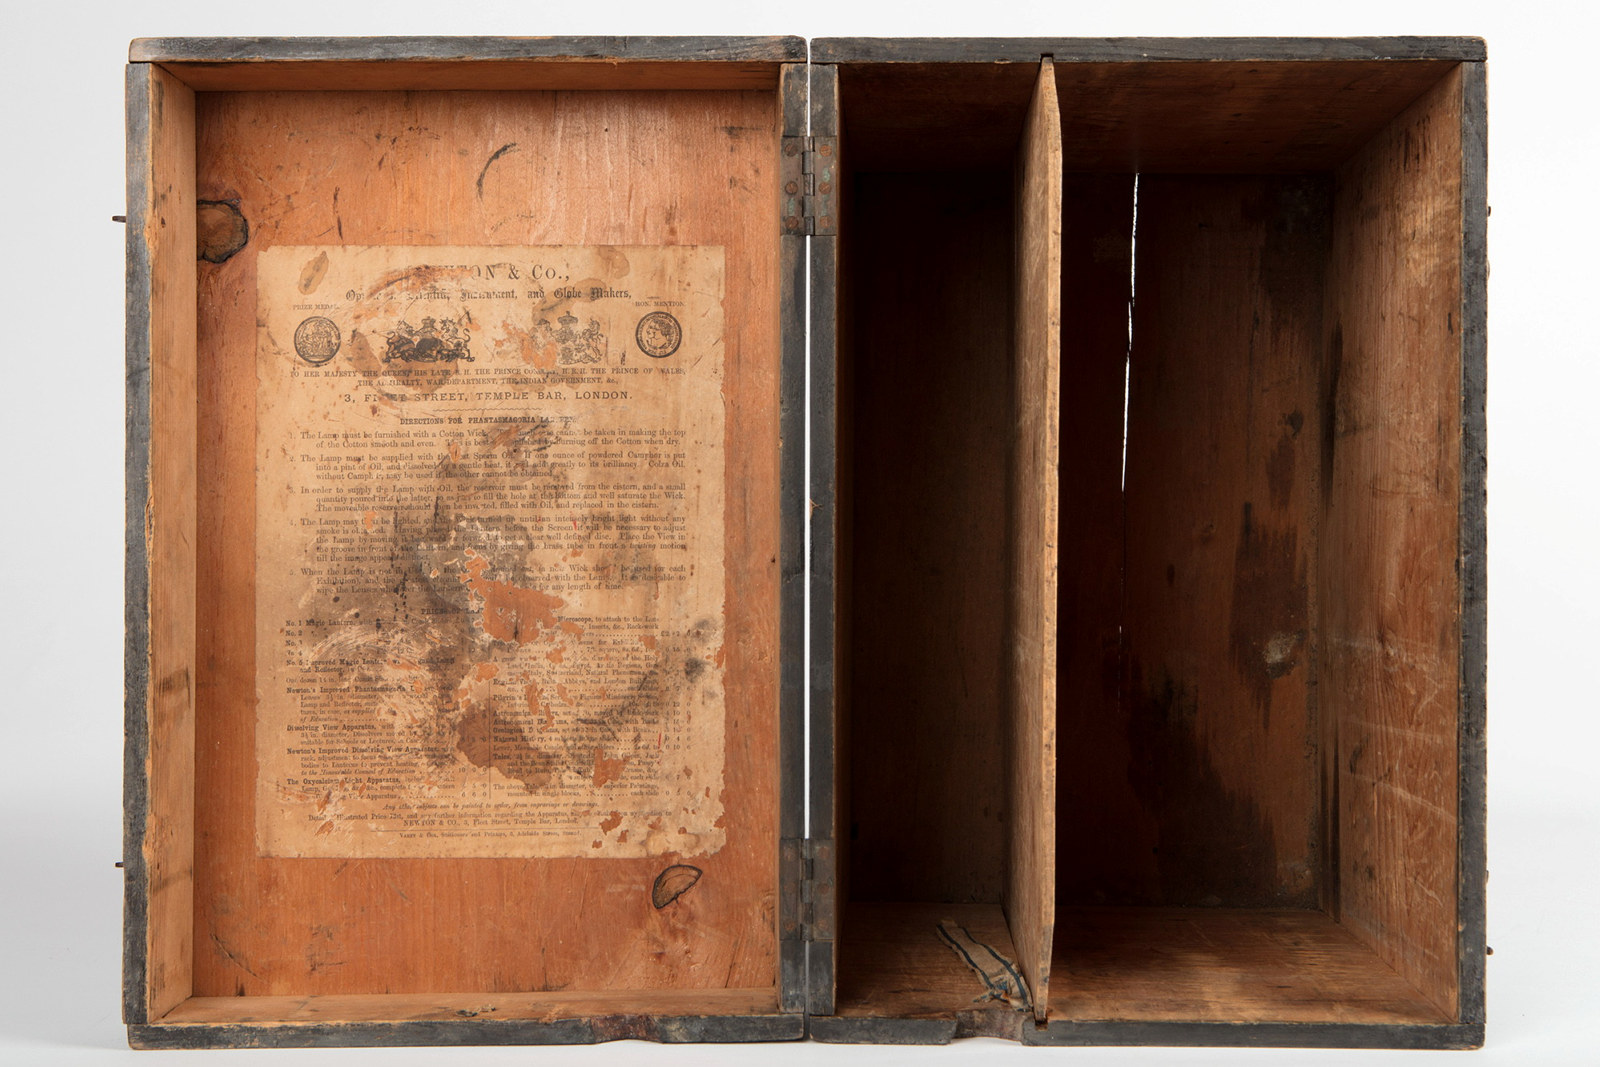 View inside timber case with paper notice pasted inside lid.